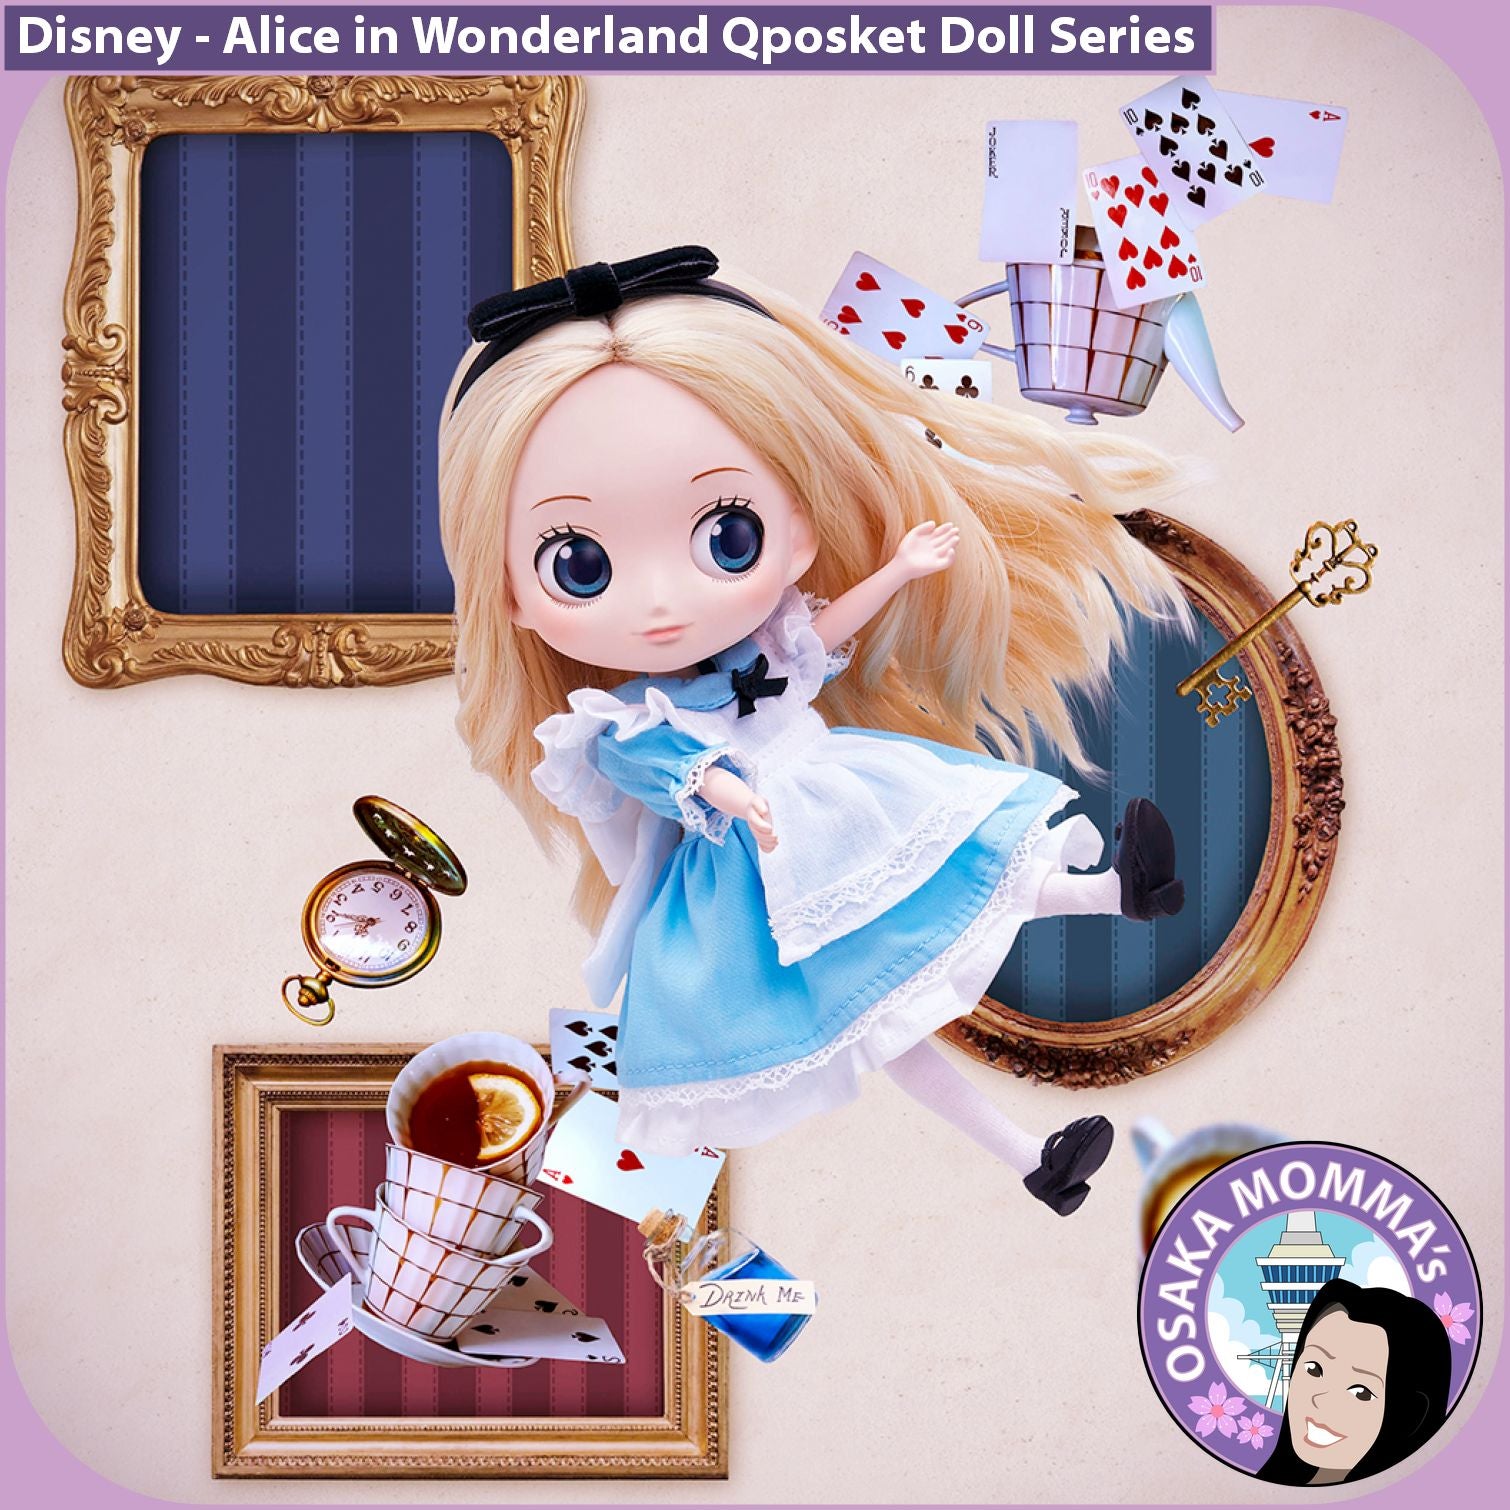 Qposket Doll Disney Character Alice アリス-